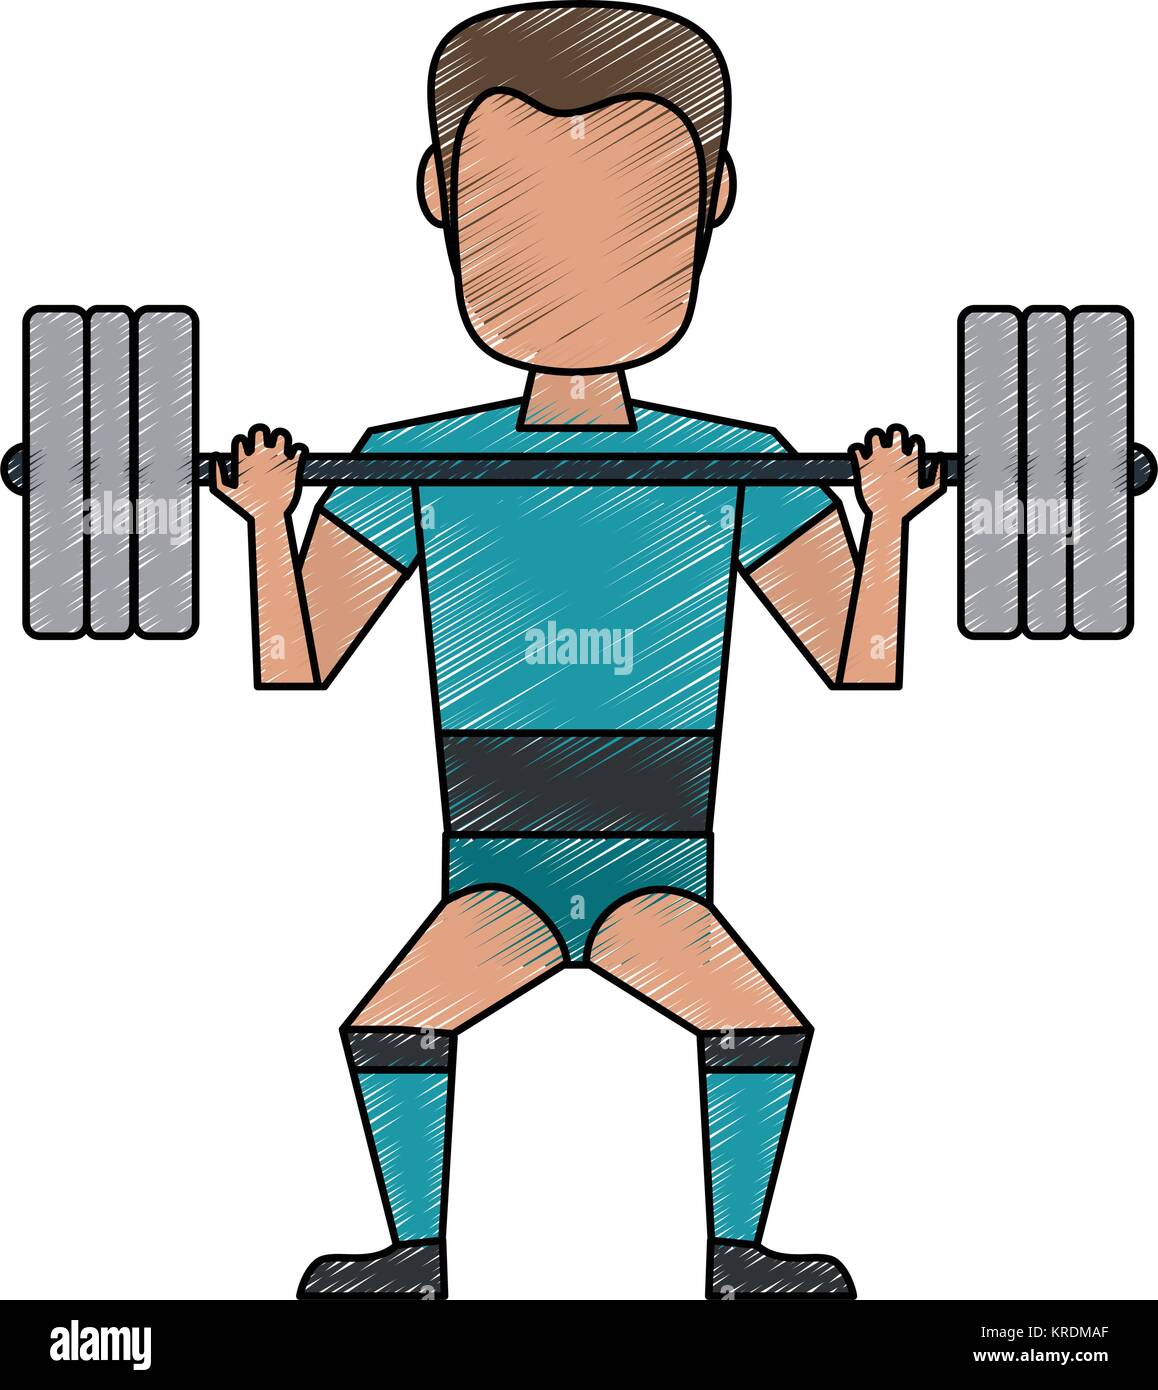 Weight Training Cartoon Images It Operates In Html5 Canvas So Your